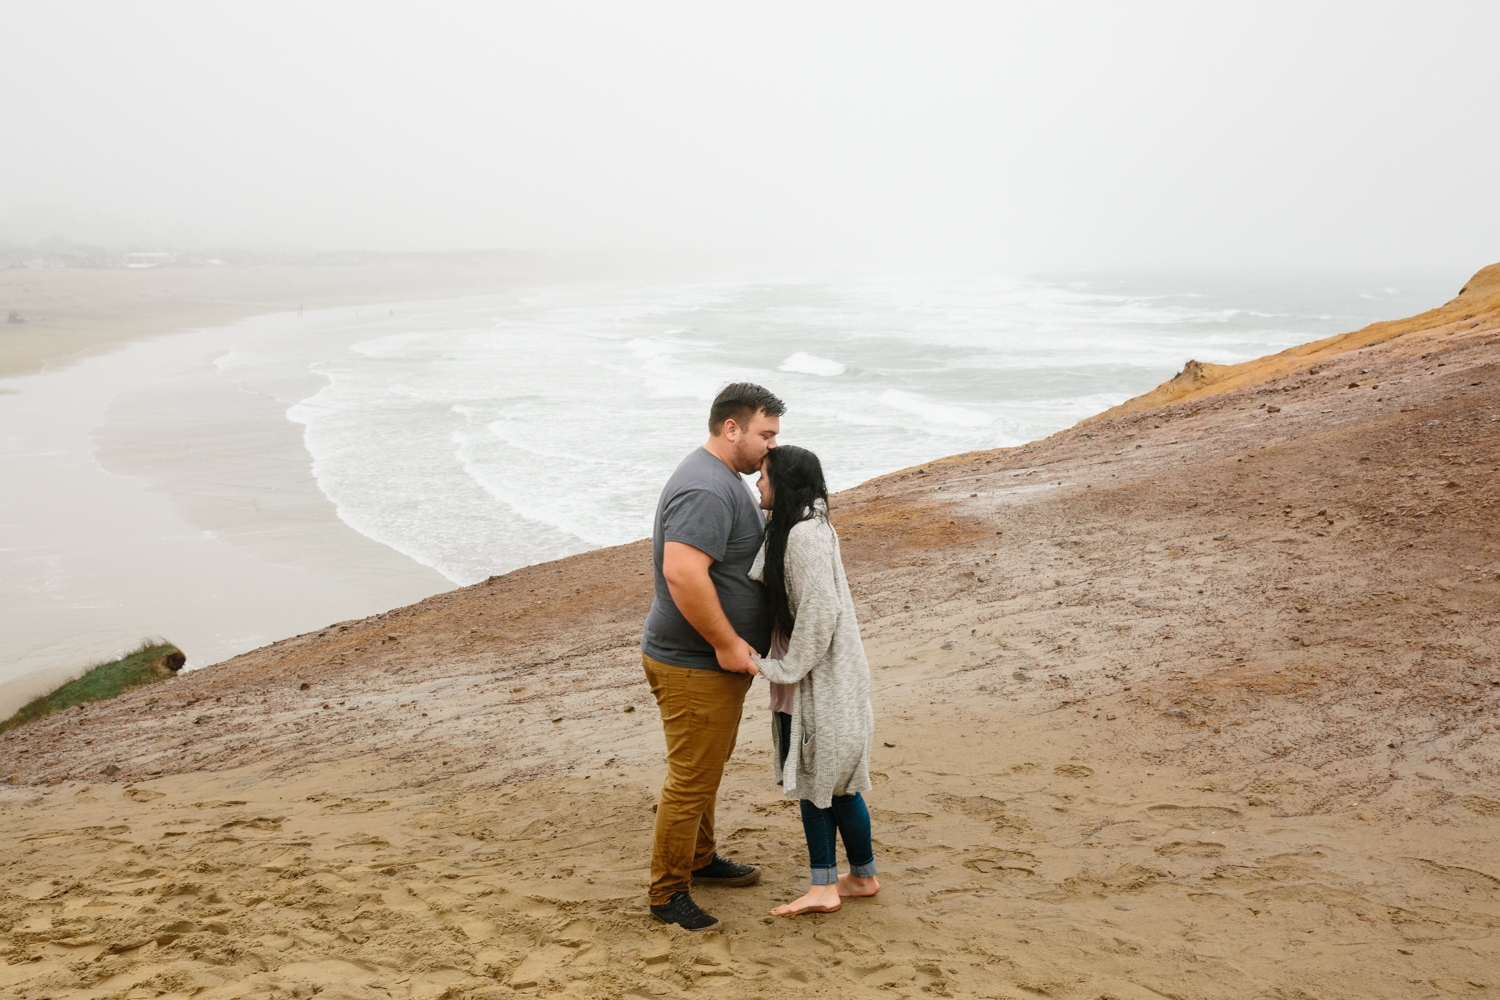 A young couple embracing while standing on a large sand dune wit